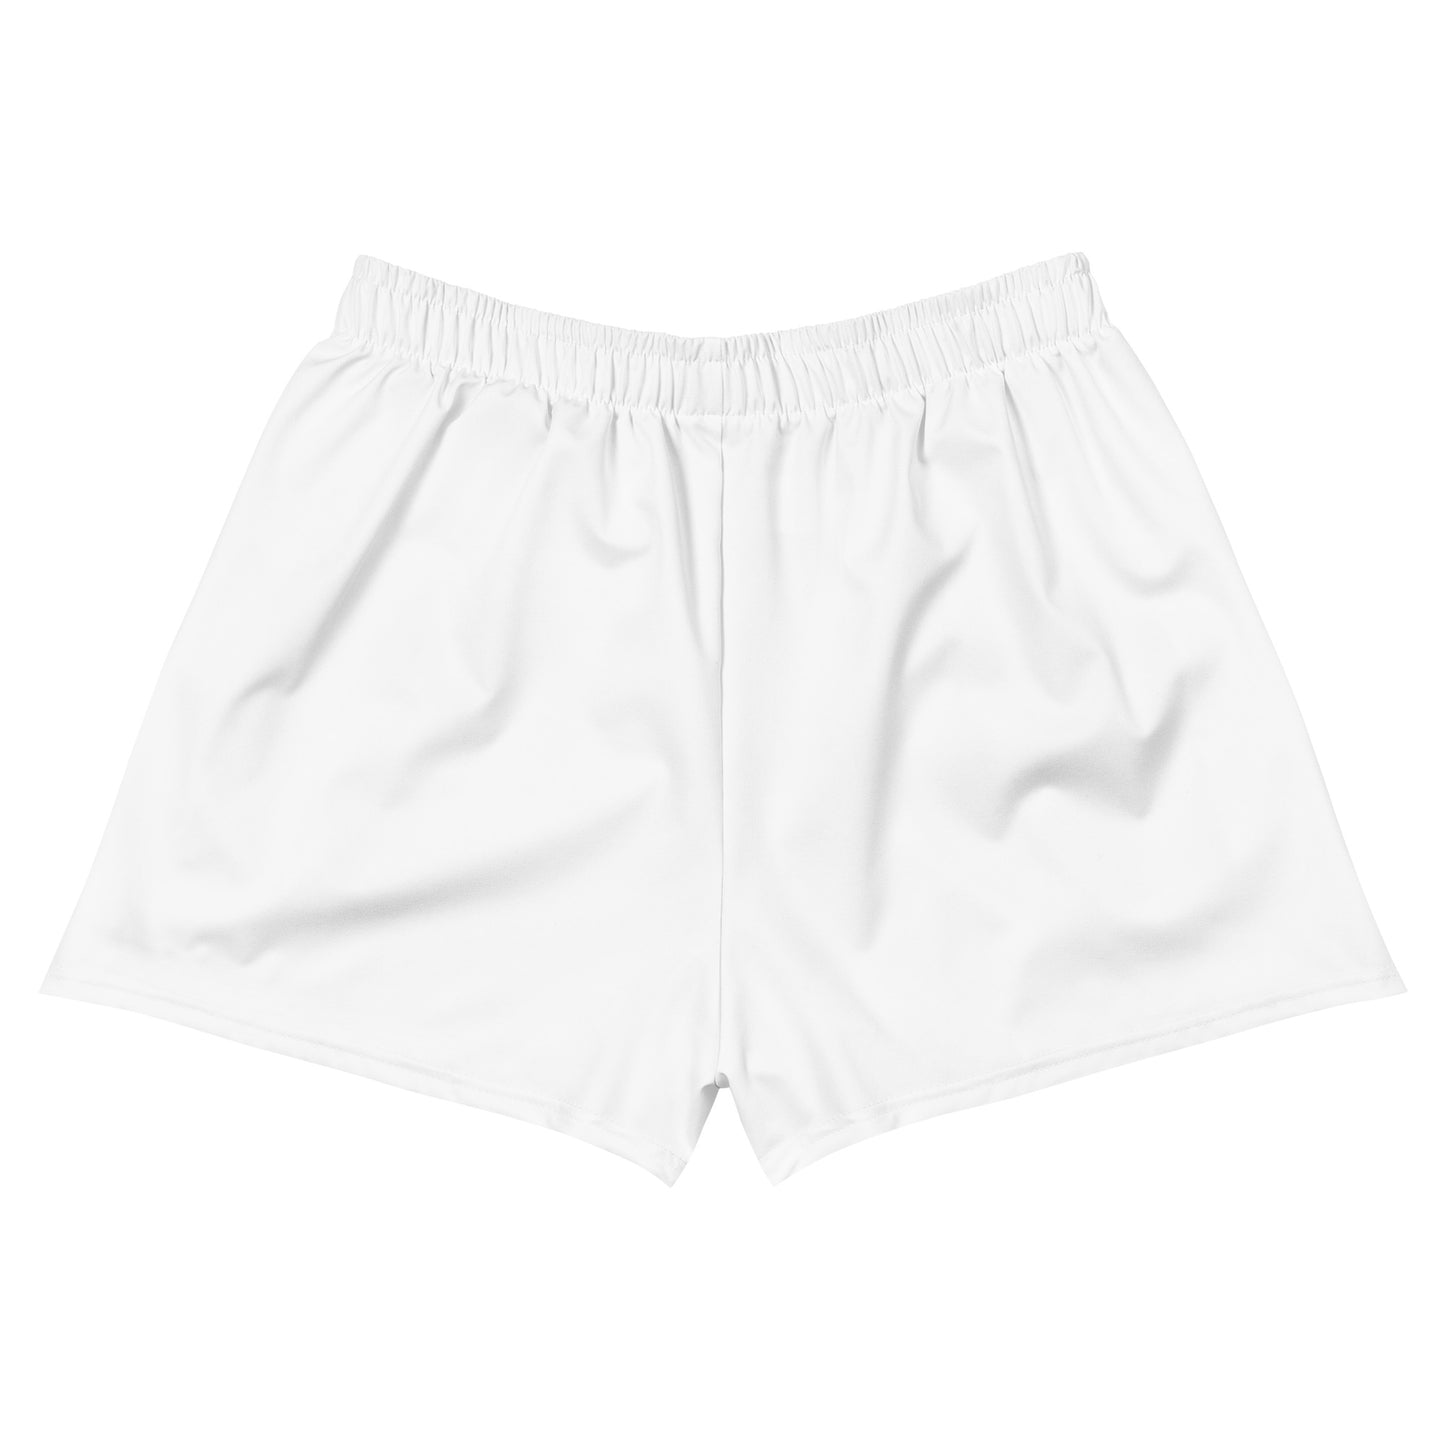 Signature Savage Mike Women’s Athletic Shorts